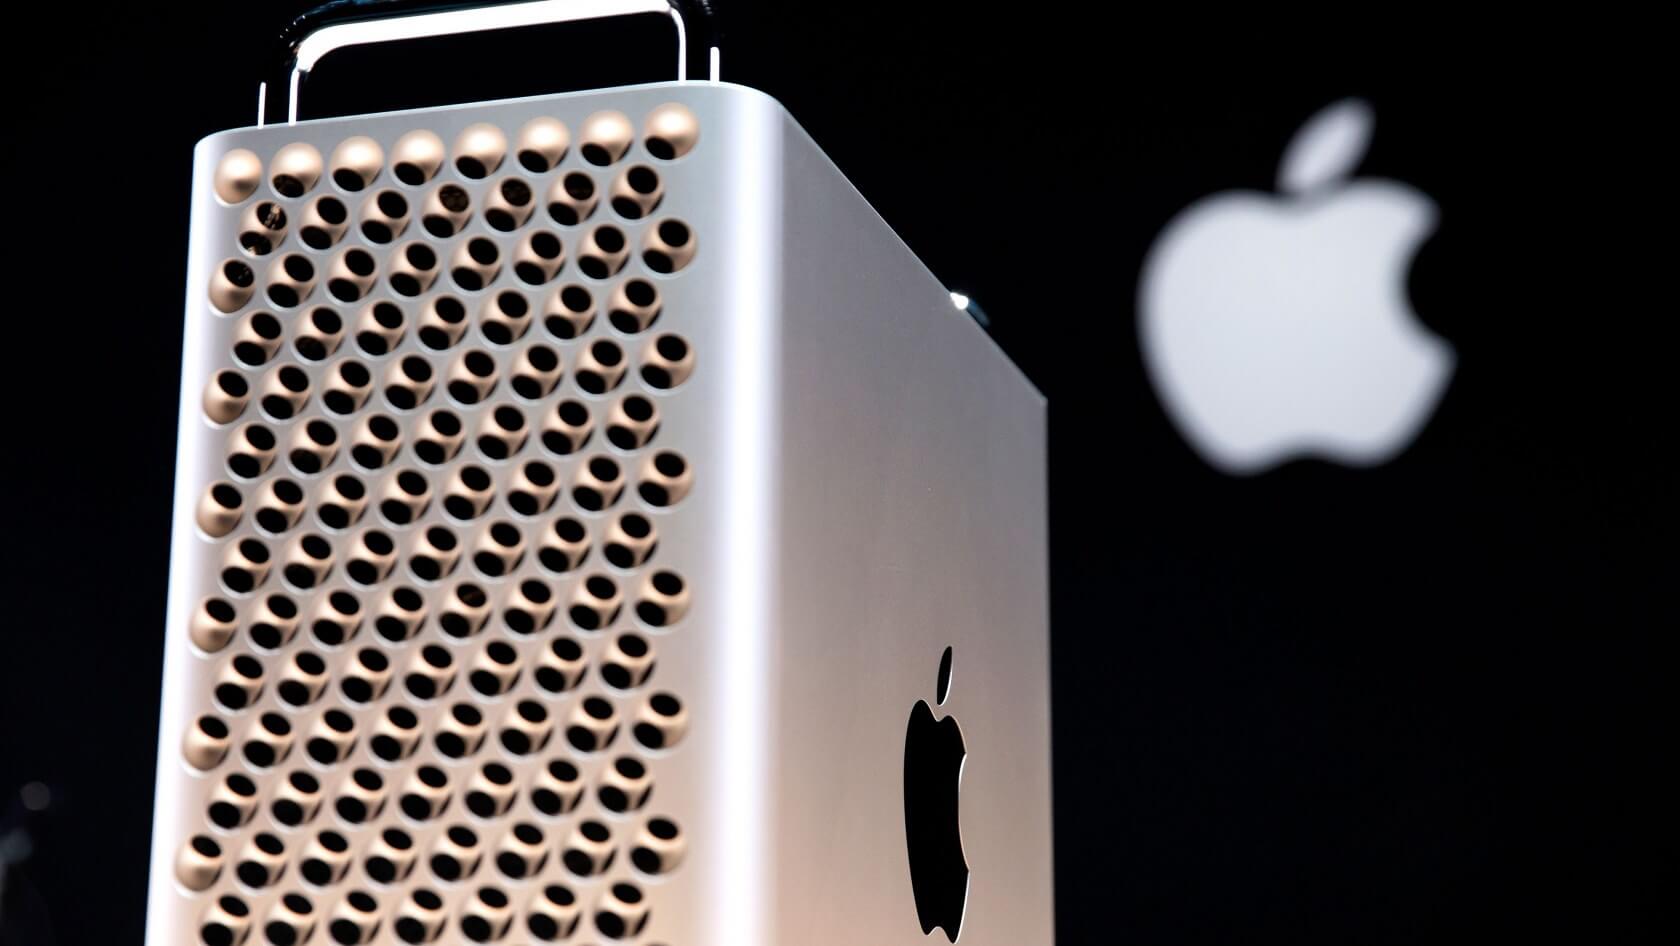 Apple is selling separate Mac Pro wheel kits for $700